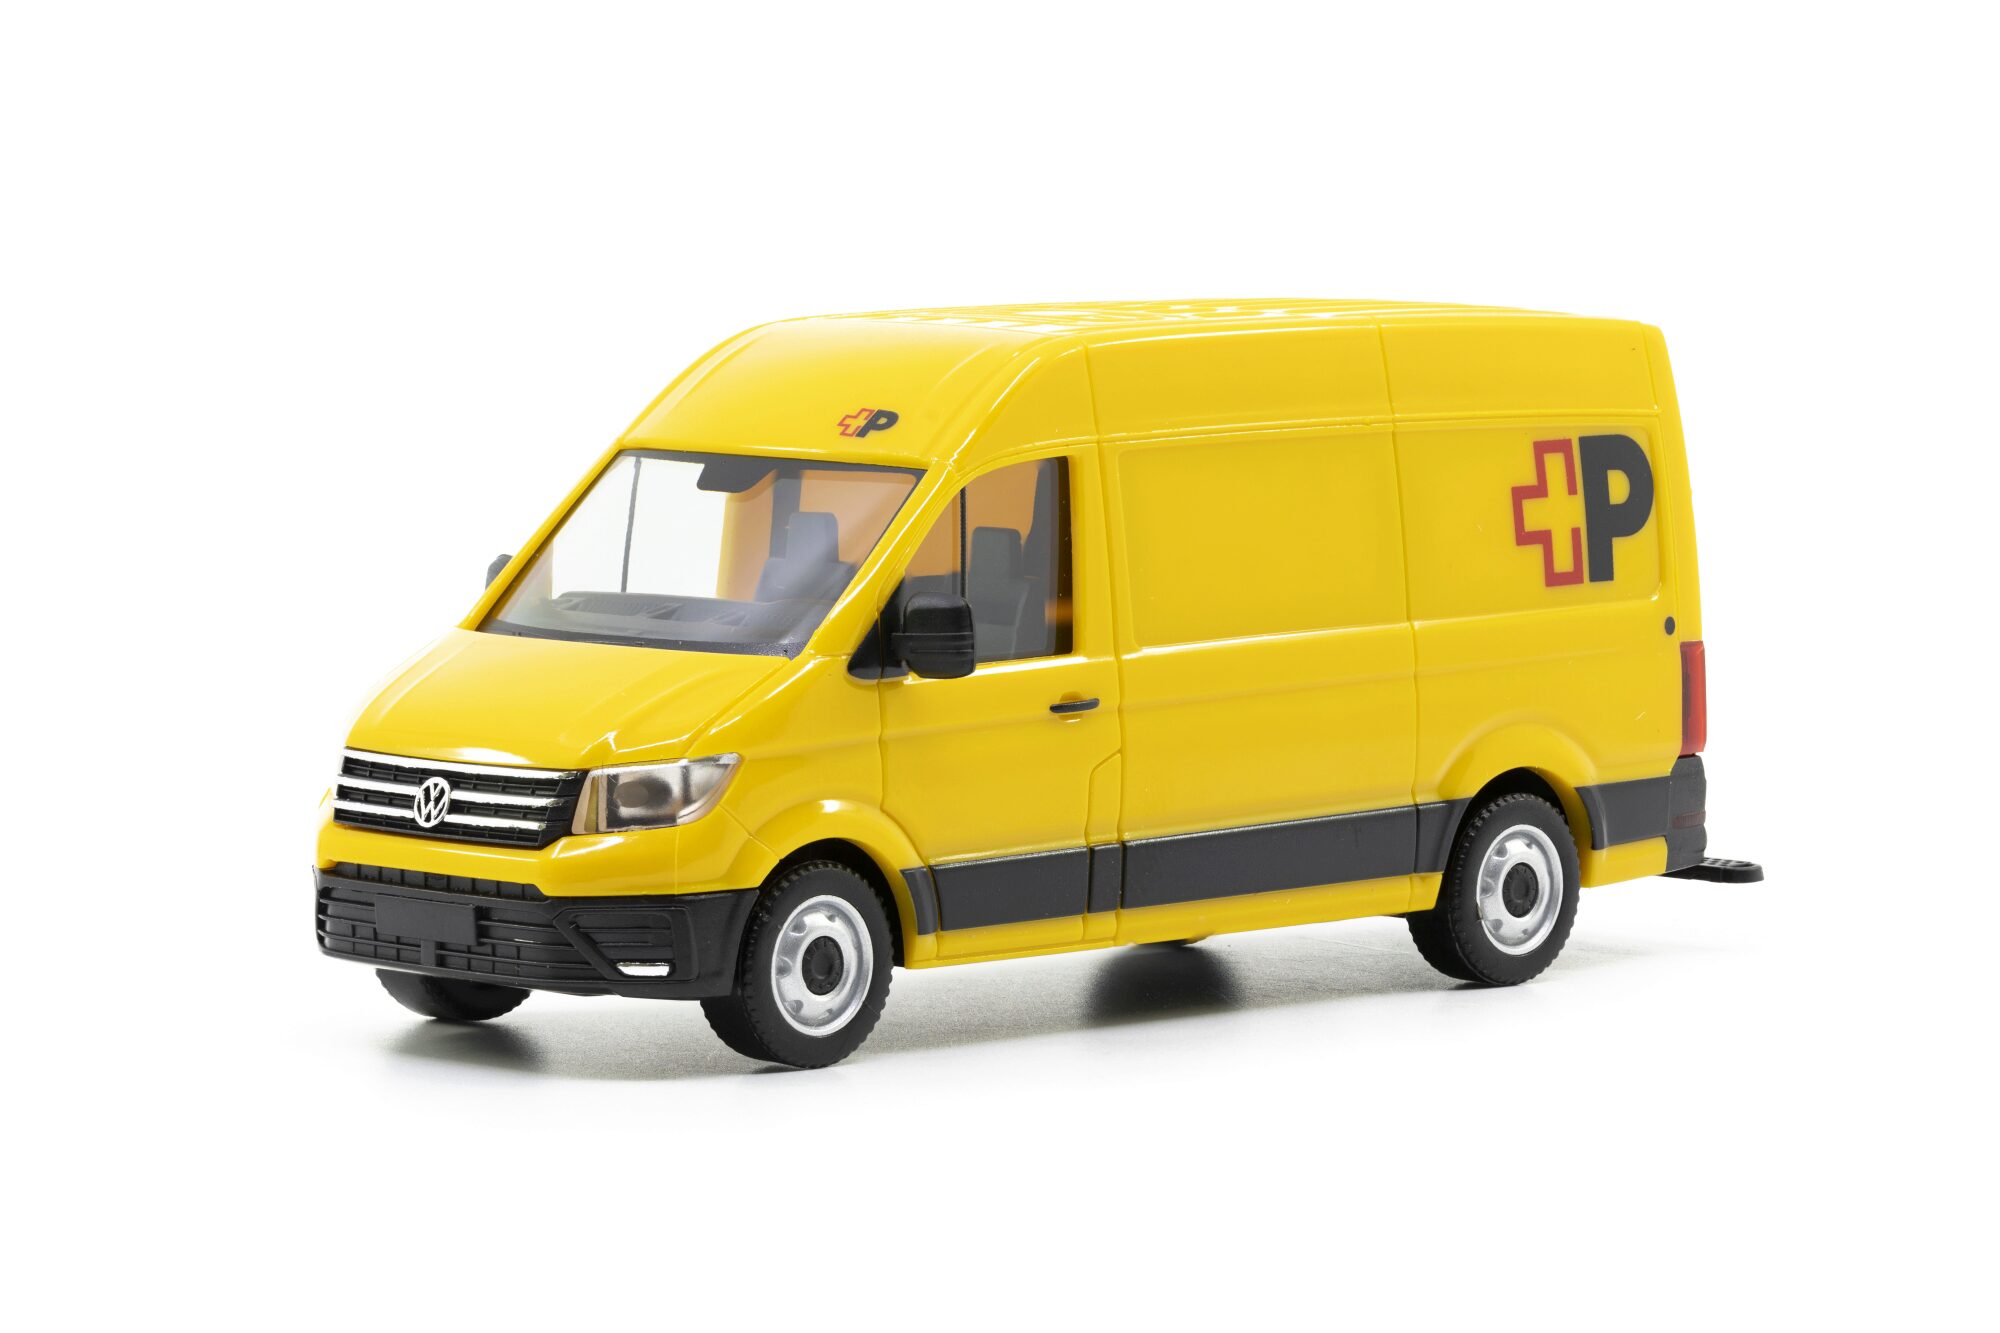 ACE 005122 VW Crafter Die Post